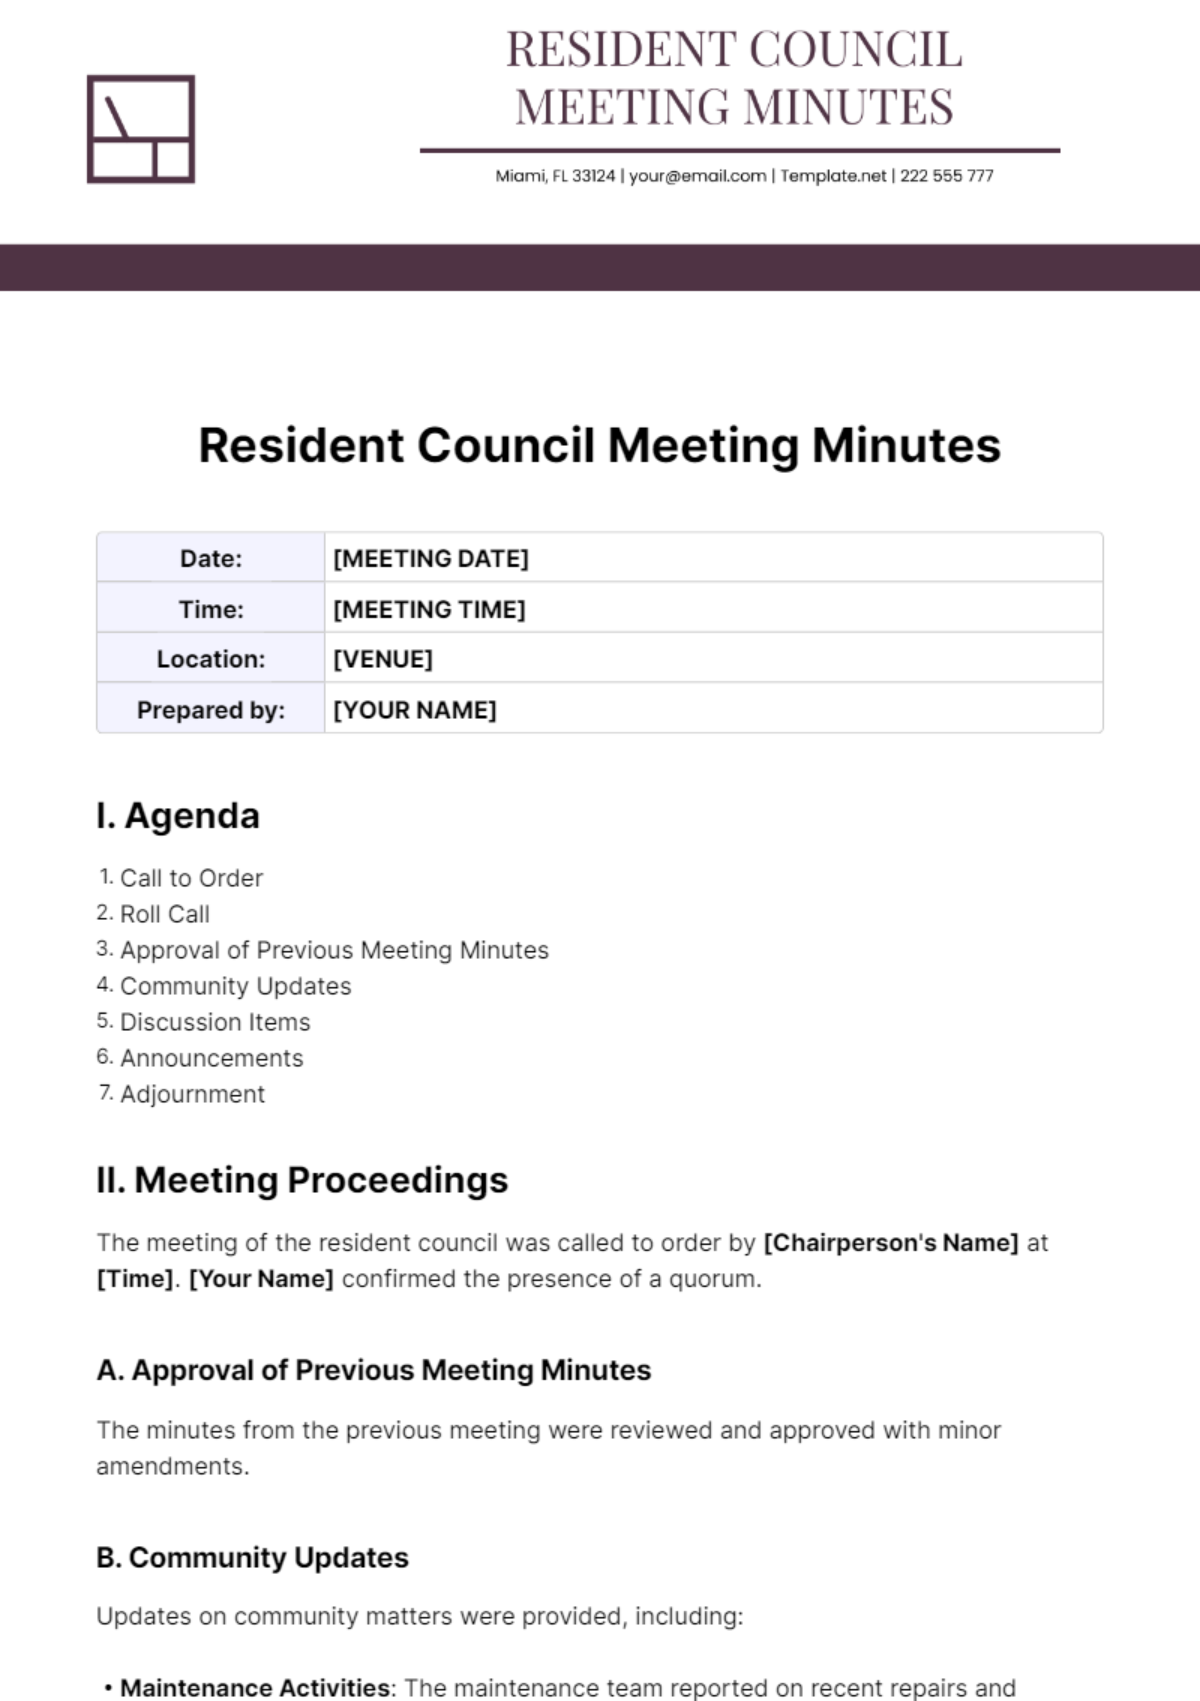 Resident Council Meeting Minutes Template